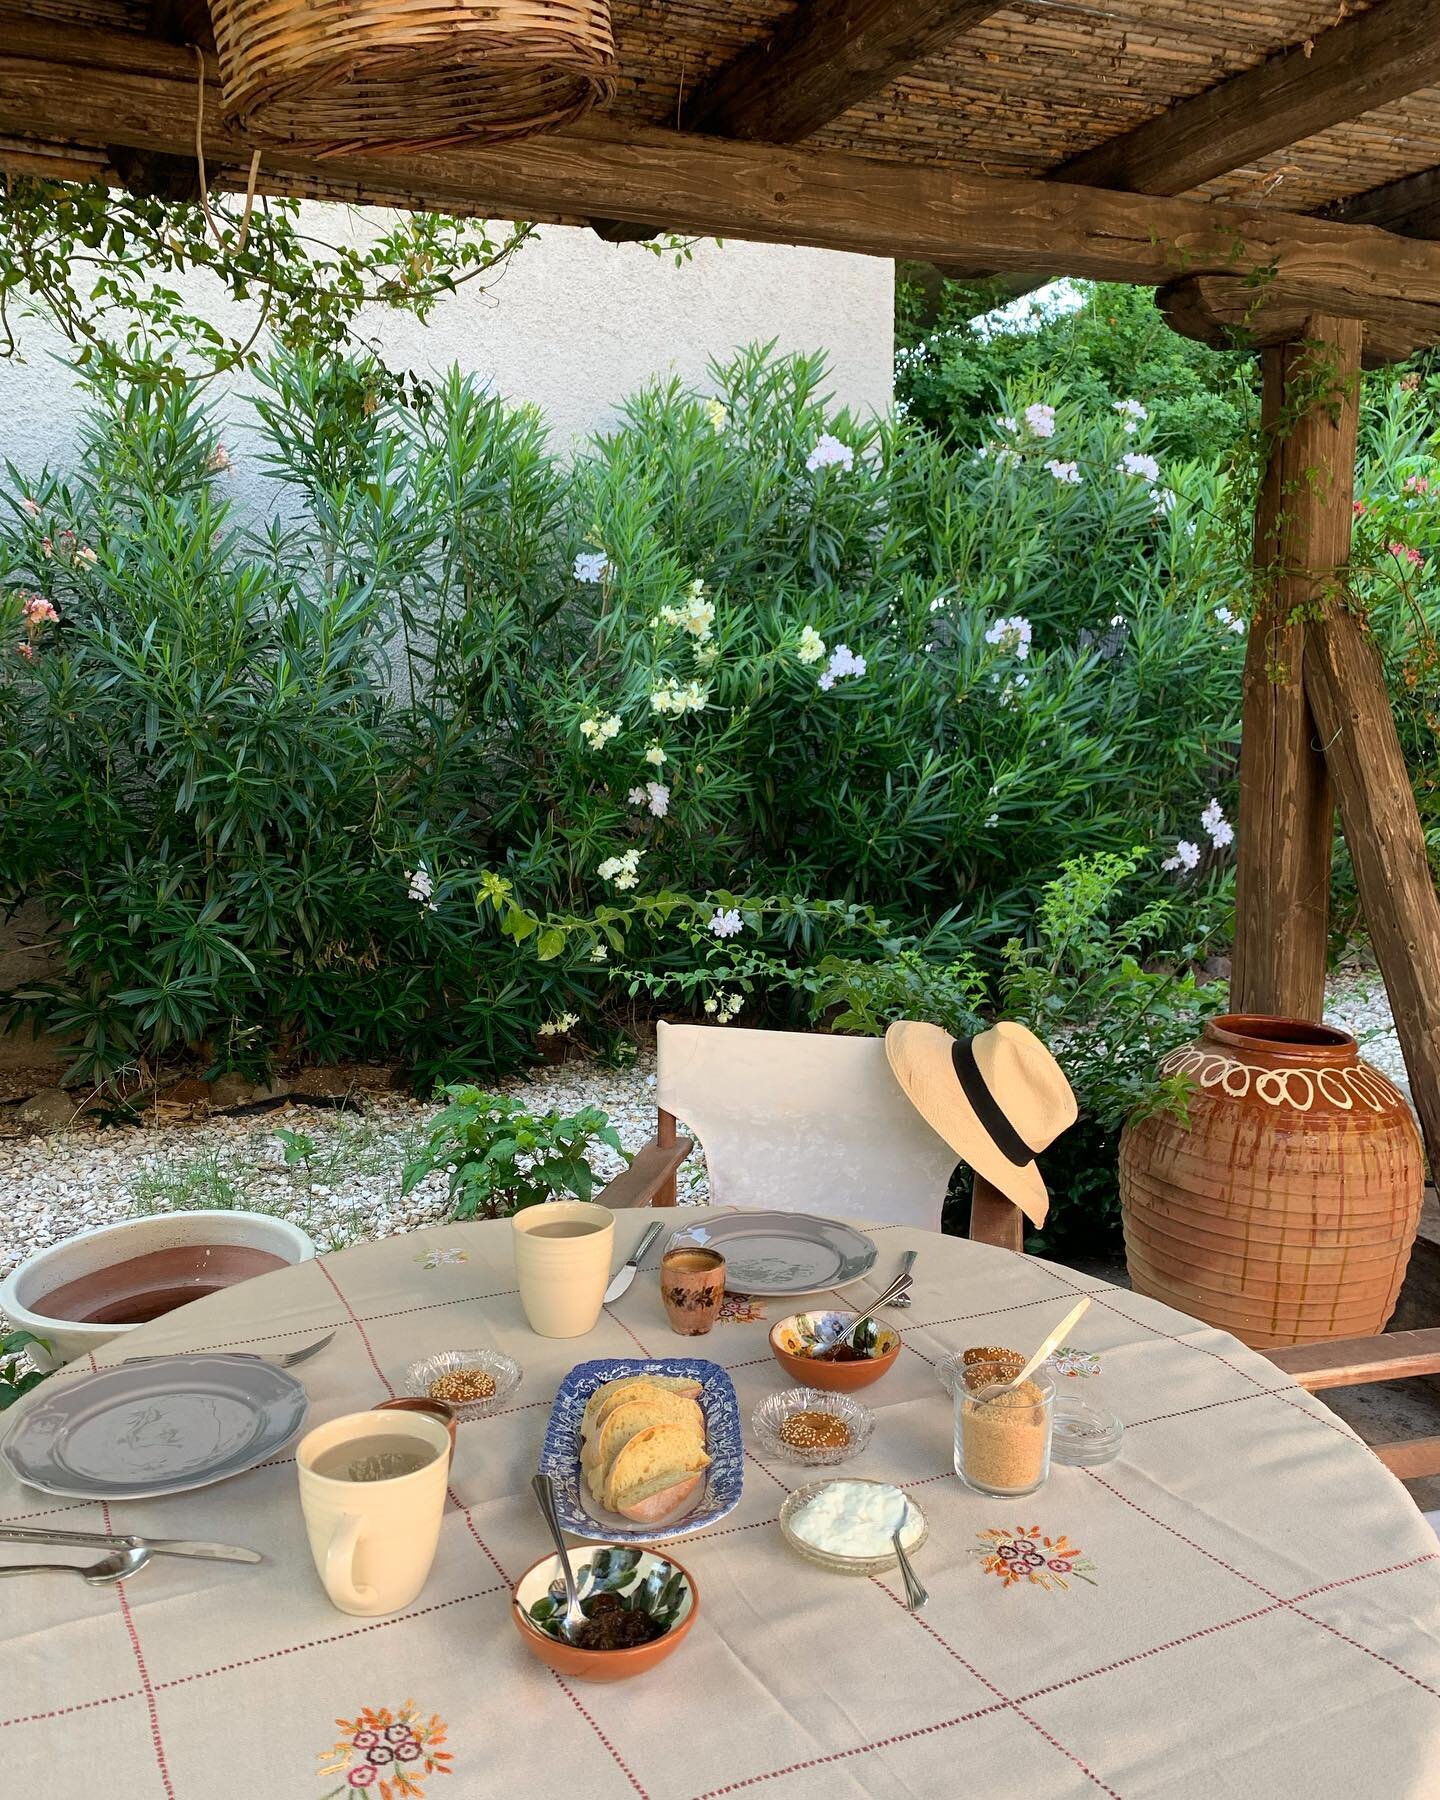 1. Breakfast in the garden
2. Biscuits, bread and yoghurt from the local morning delivery van! (would happily shop this way for the rest of my days)
3. Table by the sea 
4. Ros&eacute;, chess, watching the sun go down (best way to lose track of time&